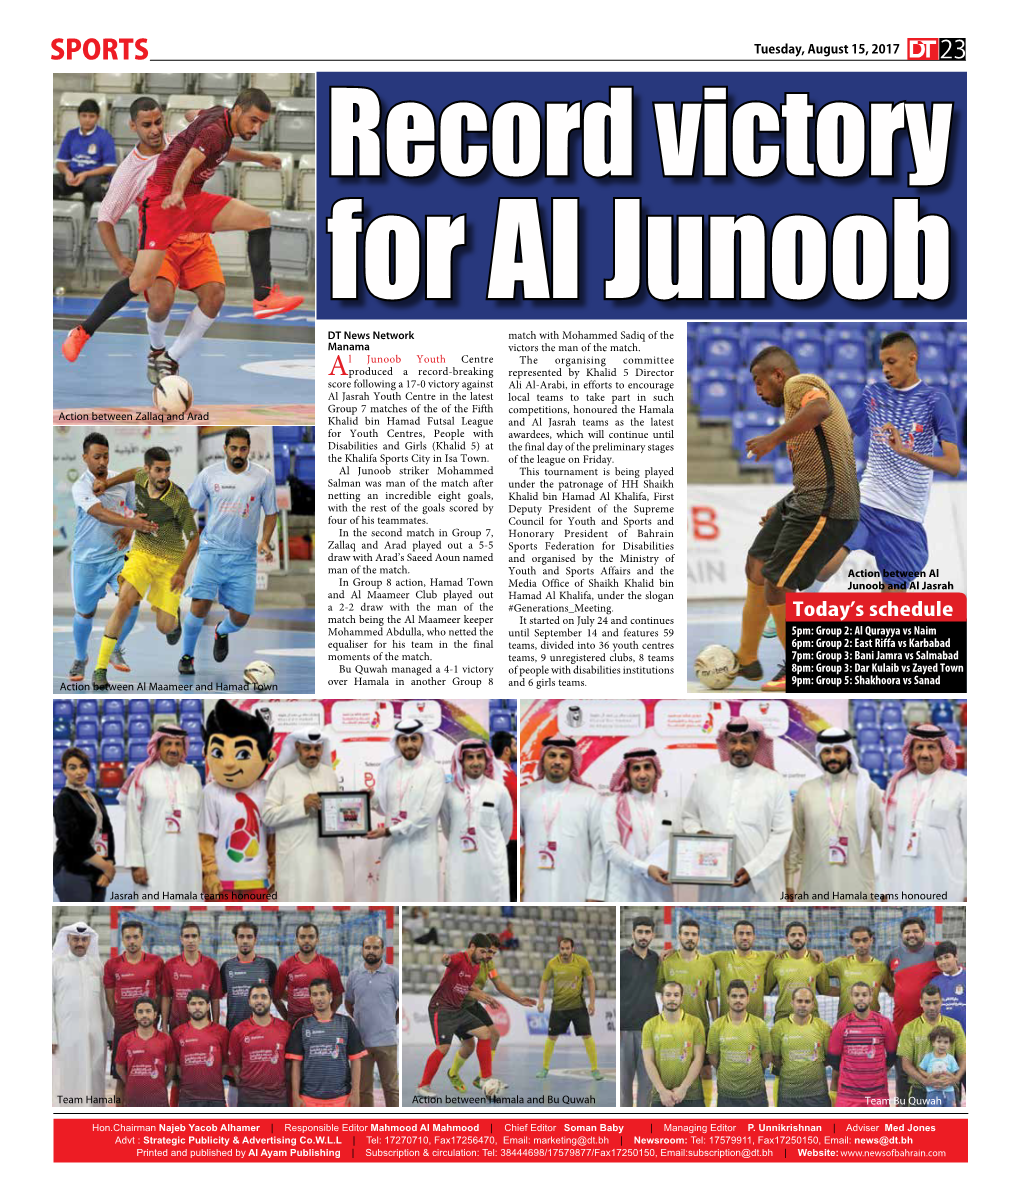 SPORTS Tuesday, August 15, 2017 23 Record Victory for Al Junoob DT News Network Match with Mohammed Sadiq of the Manama Victors the Man of the Match